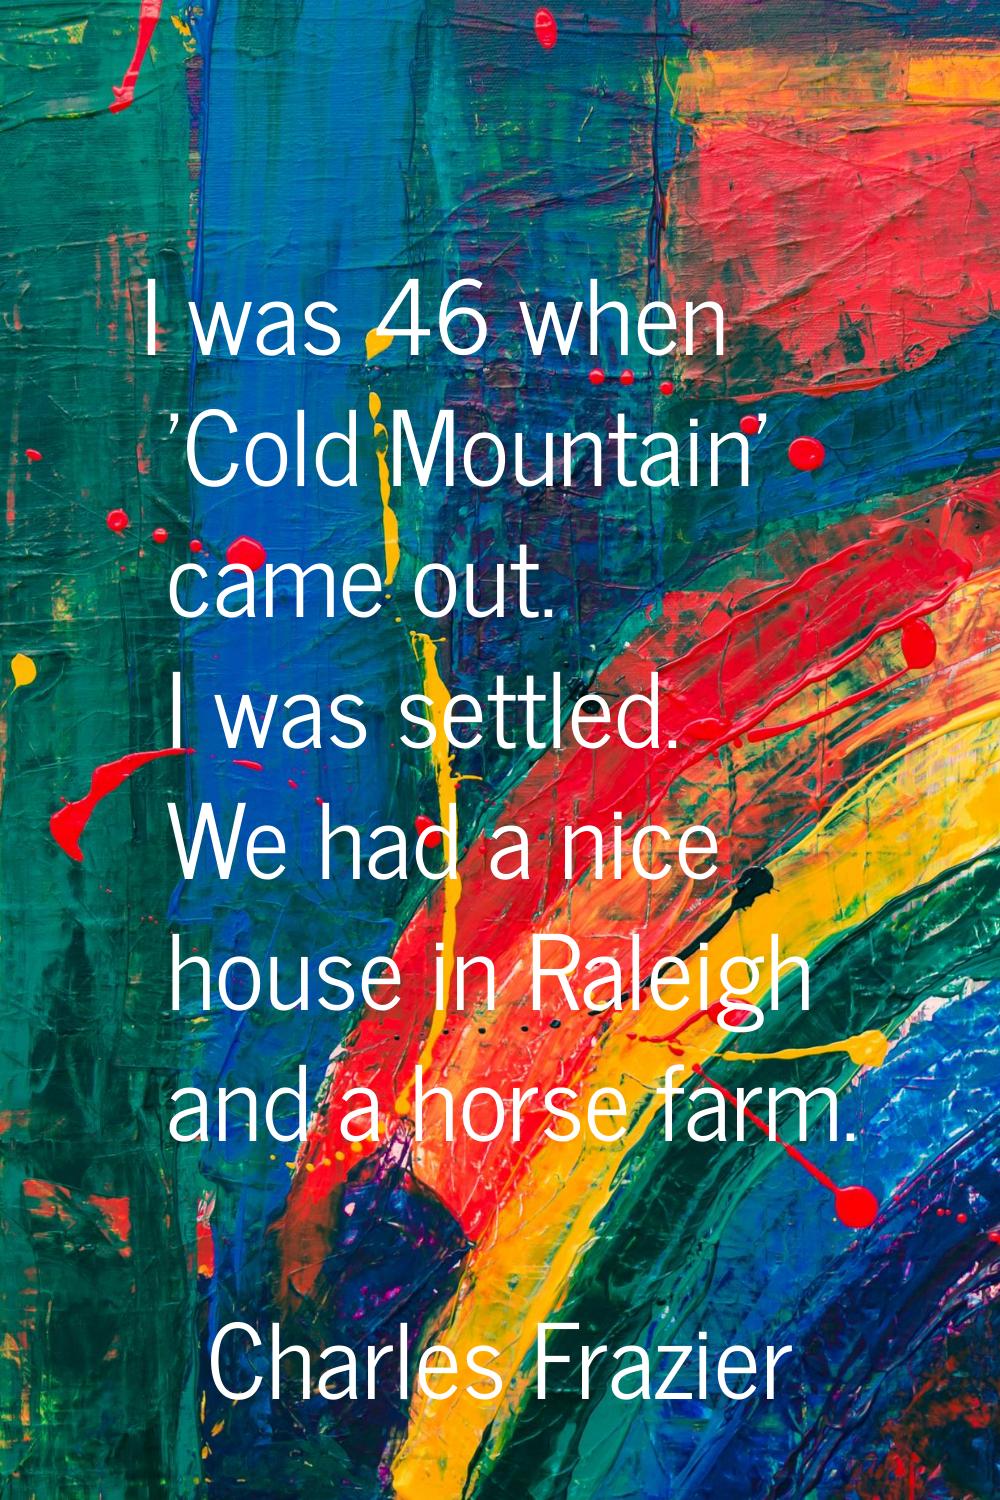 I was 46 when 'Cold Mountain' came out. I was settled. We had a nice house in Raleigh and a horse f